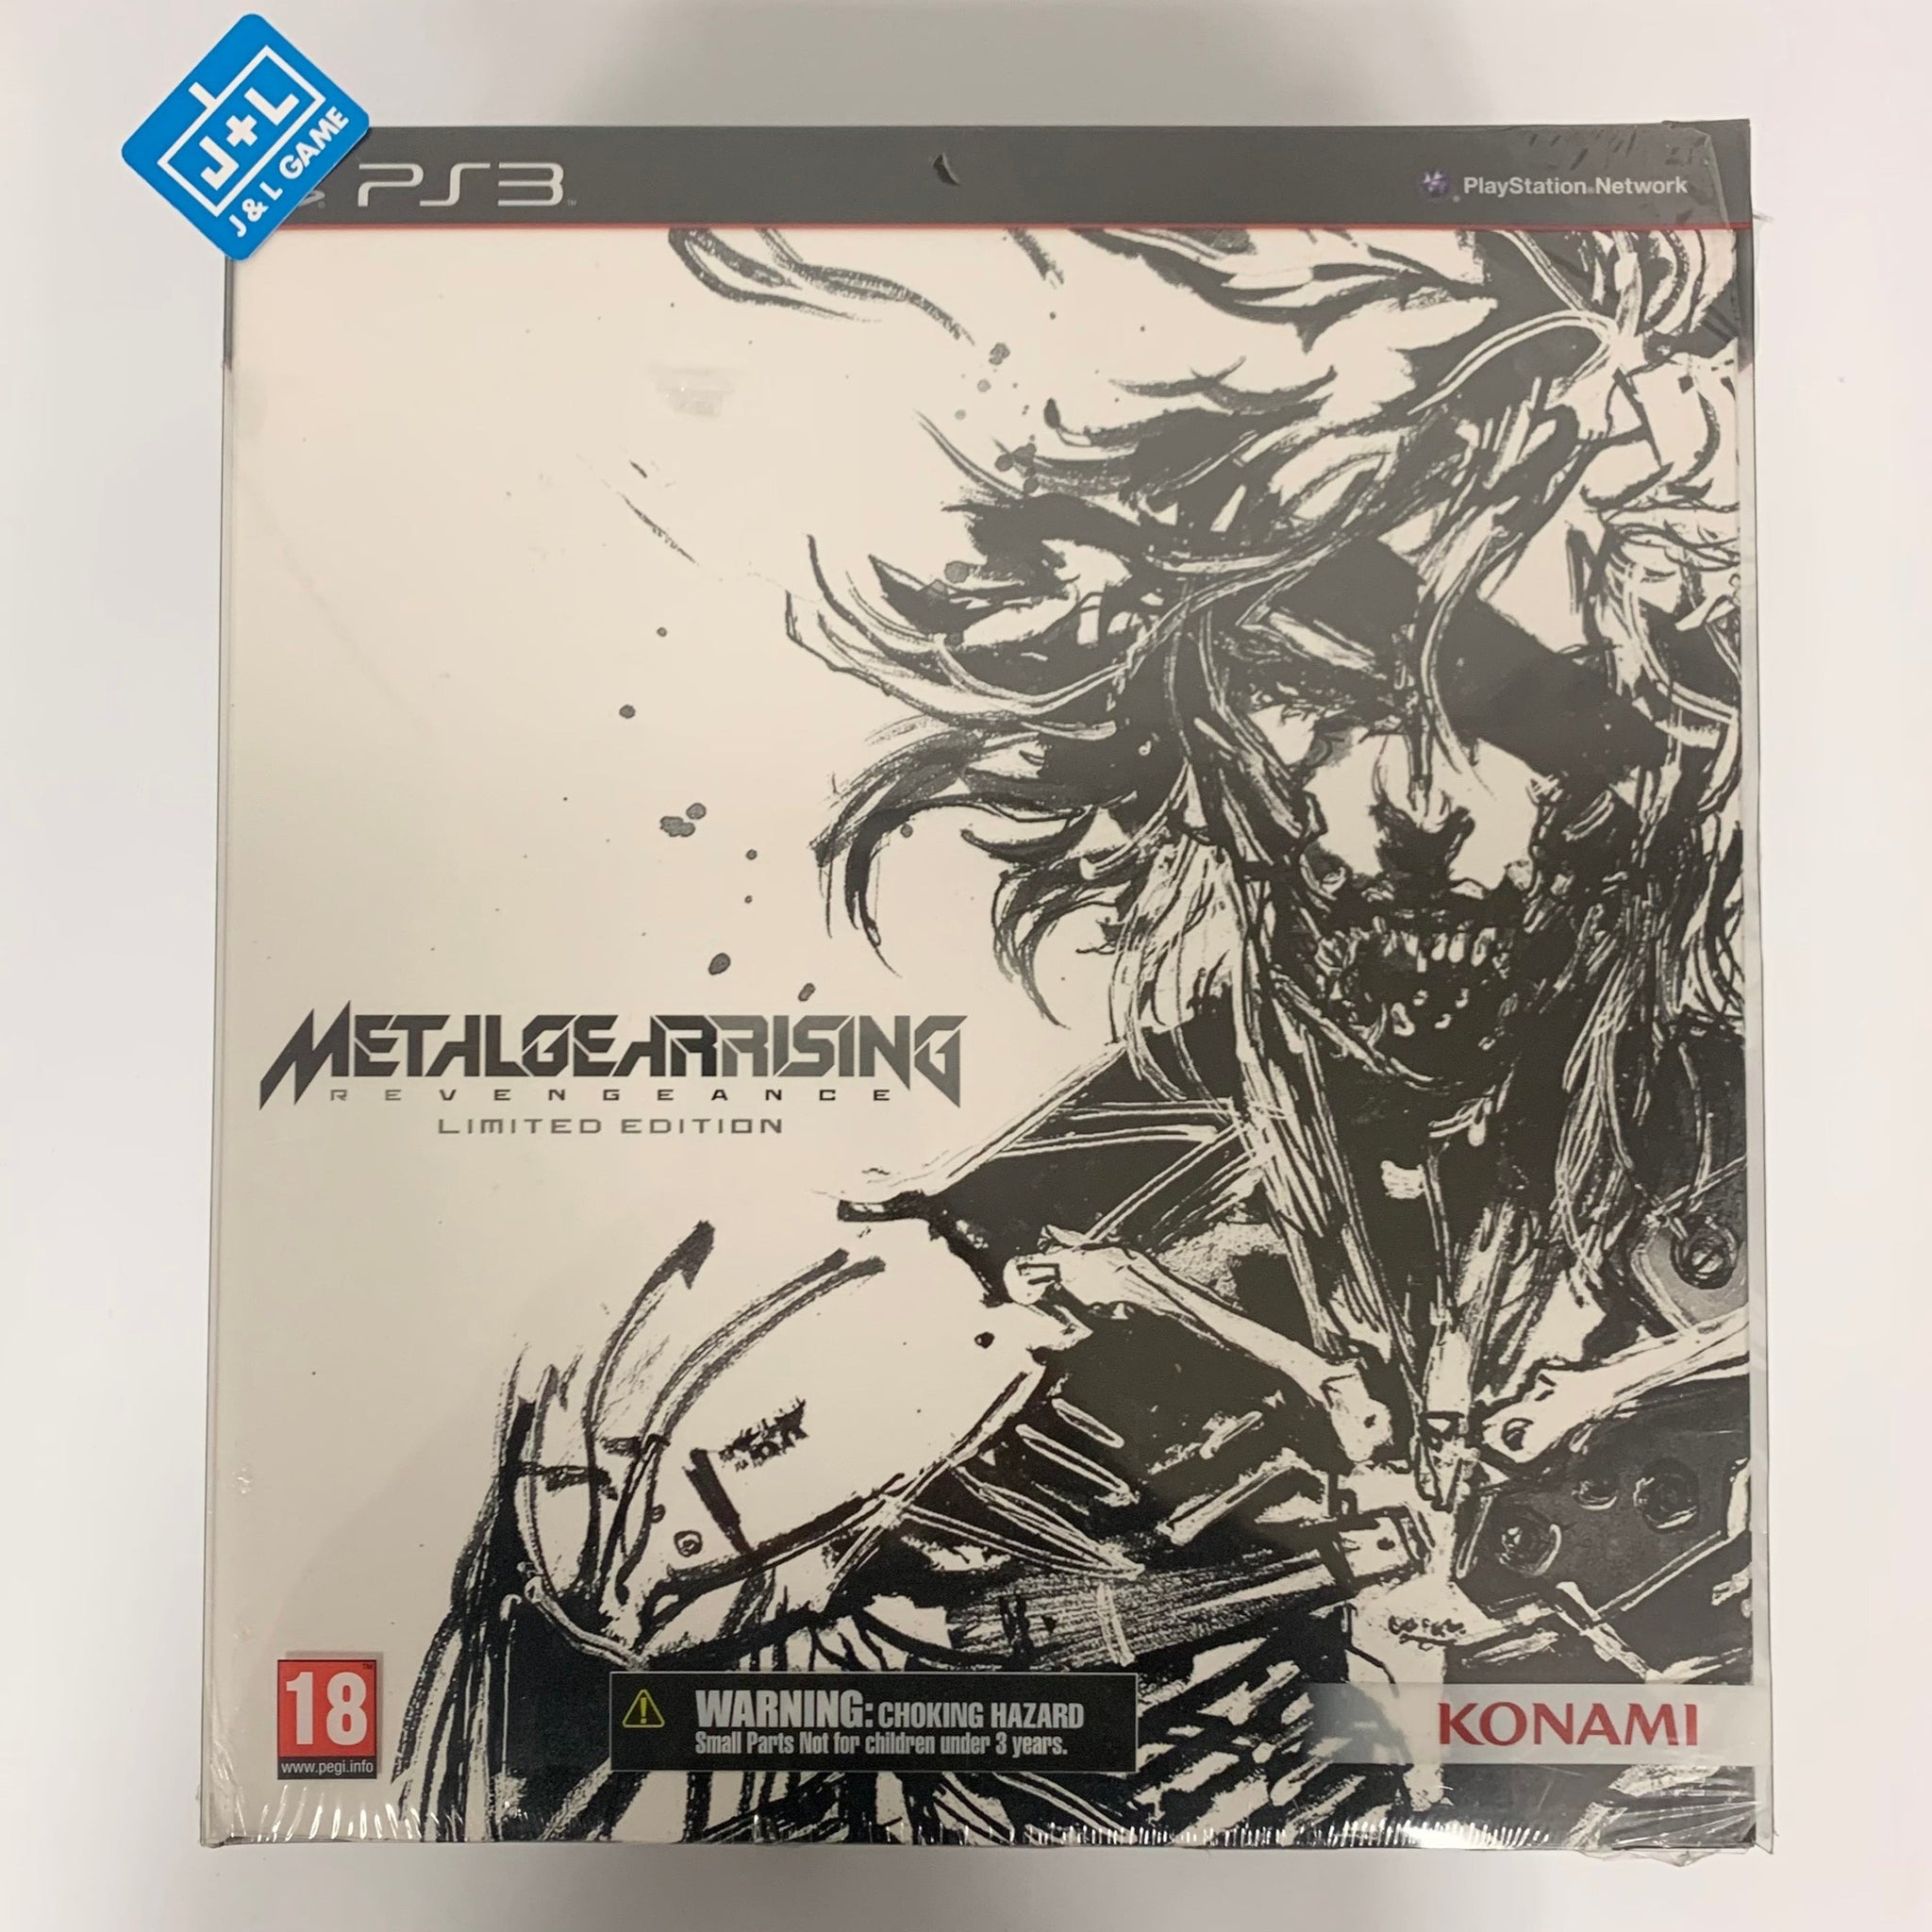 Metal Gear Rising: Revengeance Limited Edition PS3 & Xbox 360